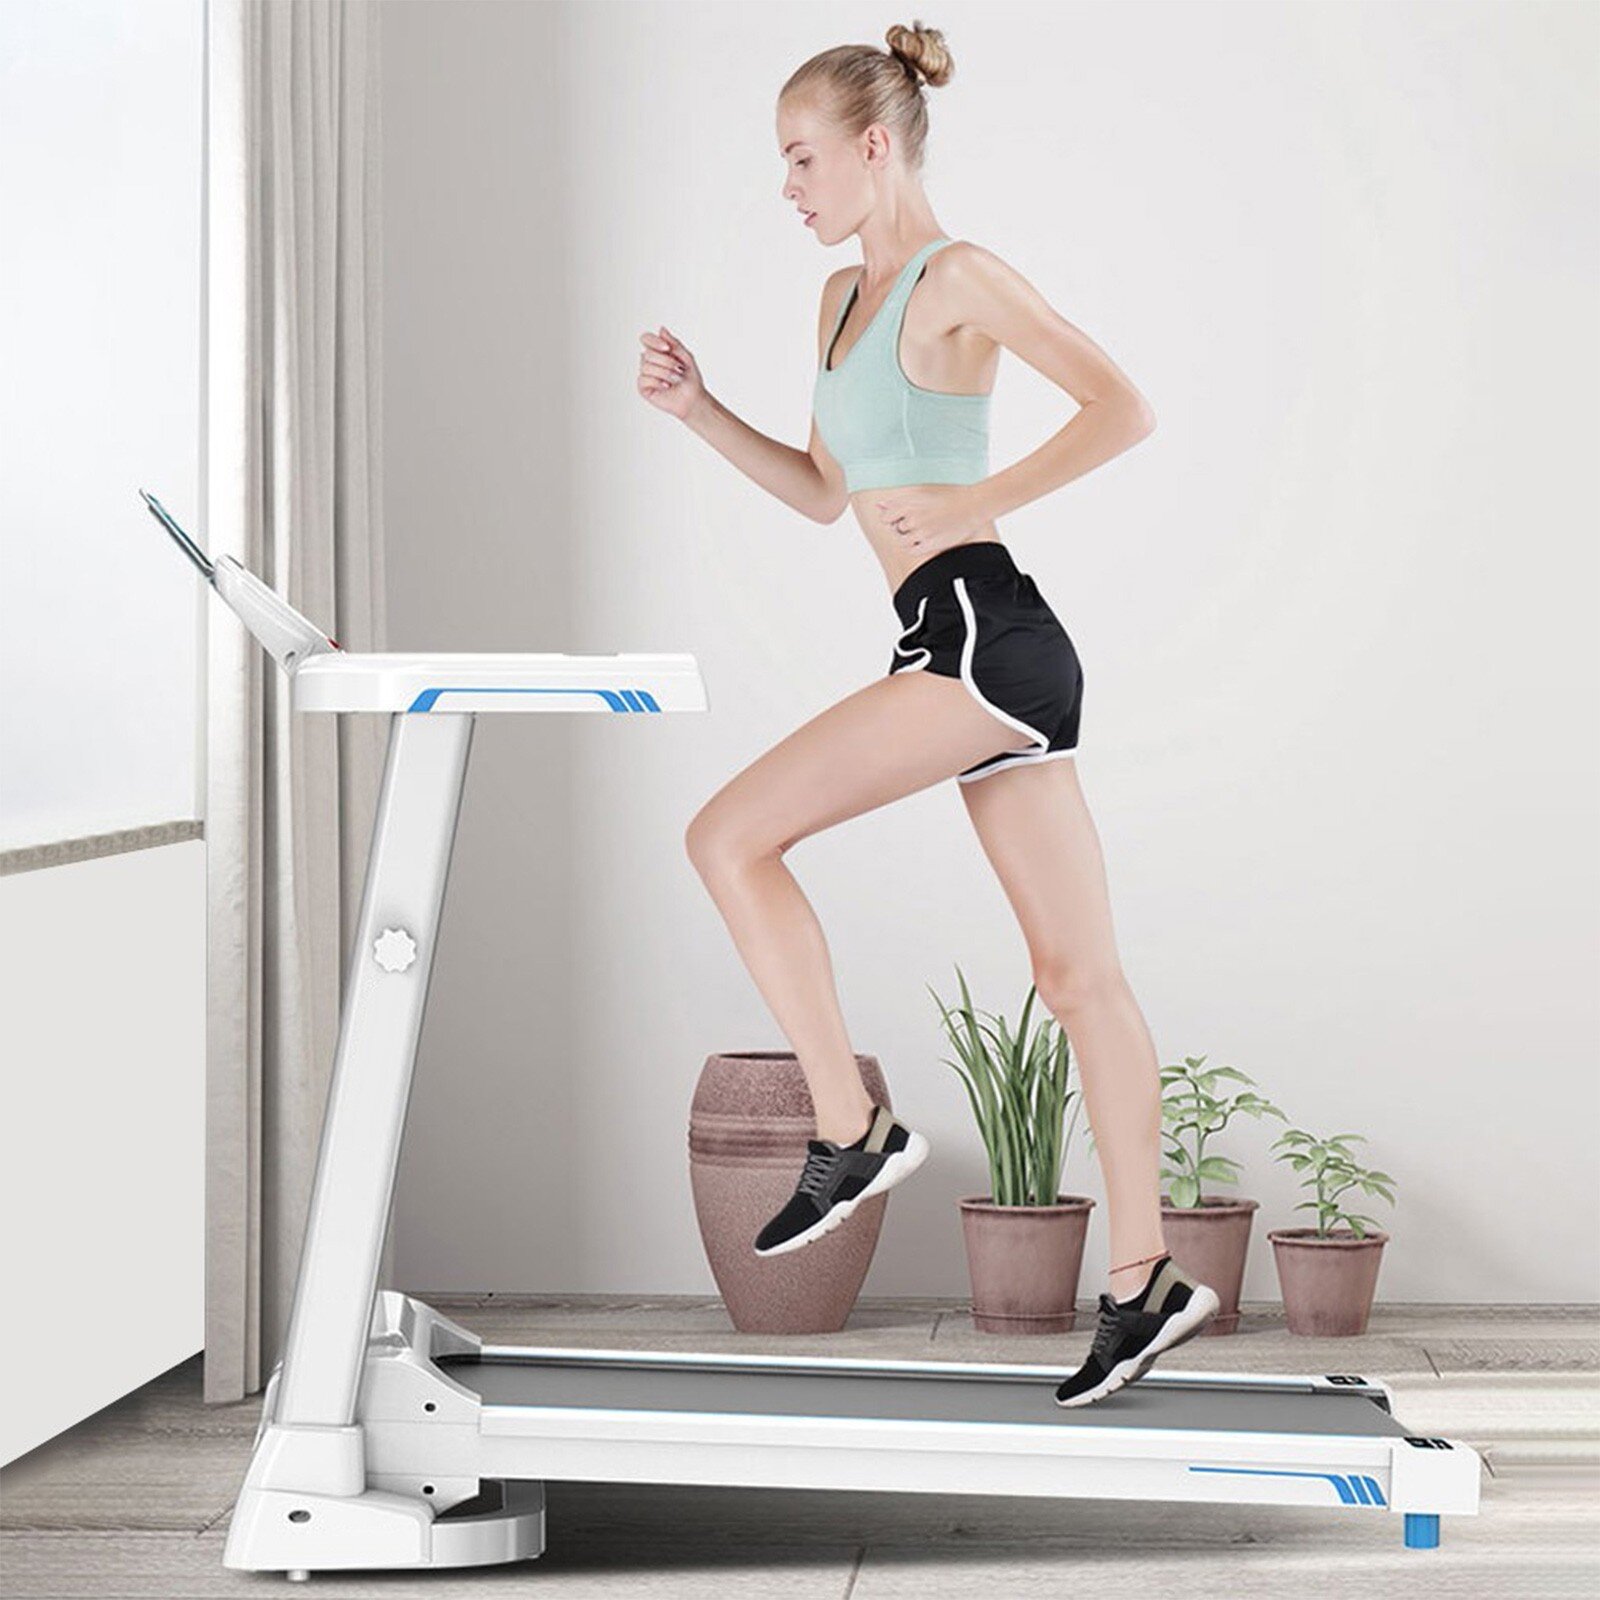 Details about   Home Folding Treadmill Electric Motorized Power Running Jogging Fitness Machine